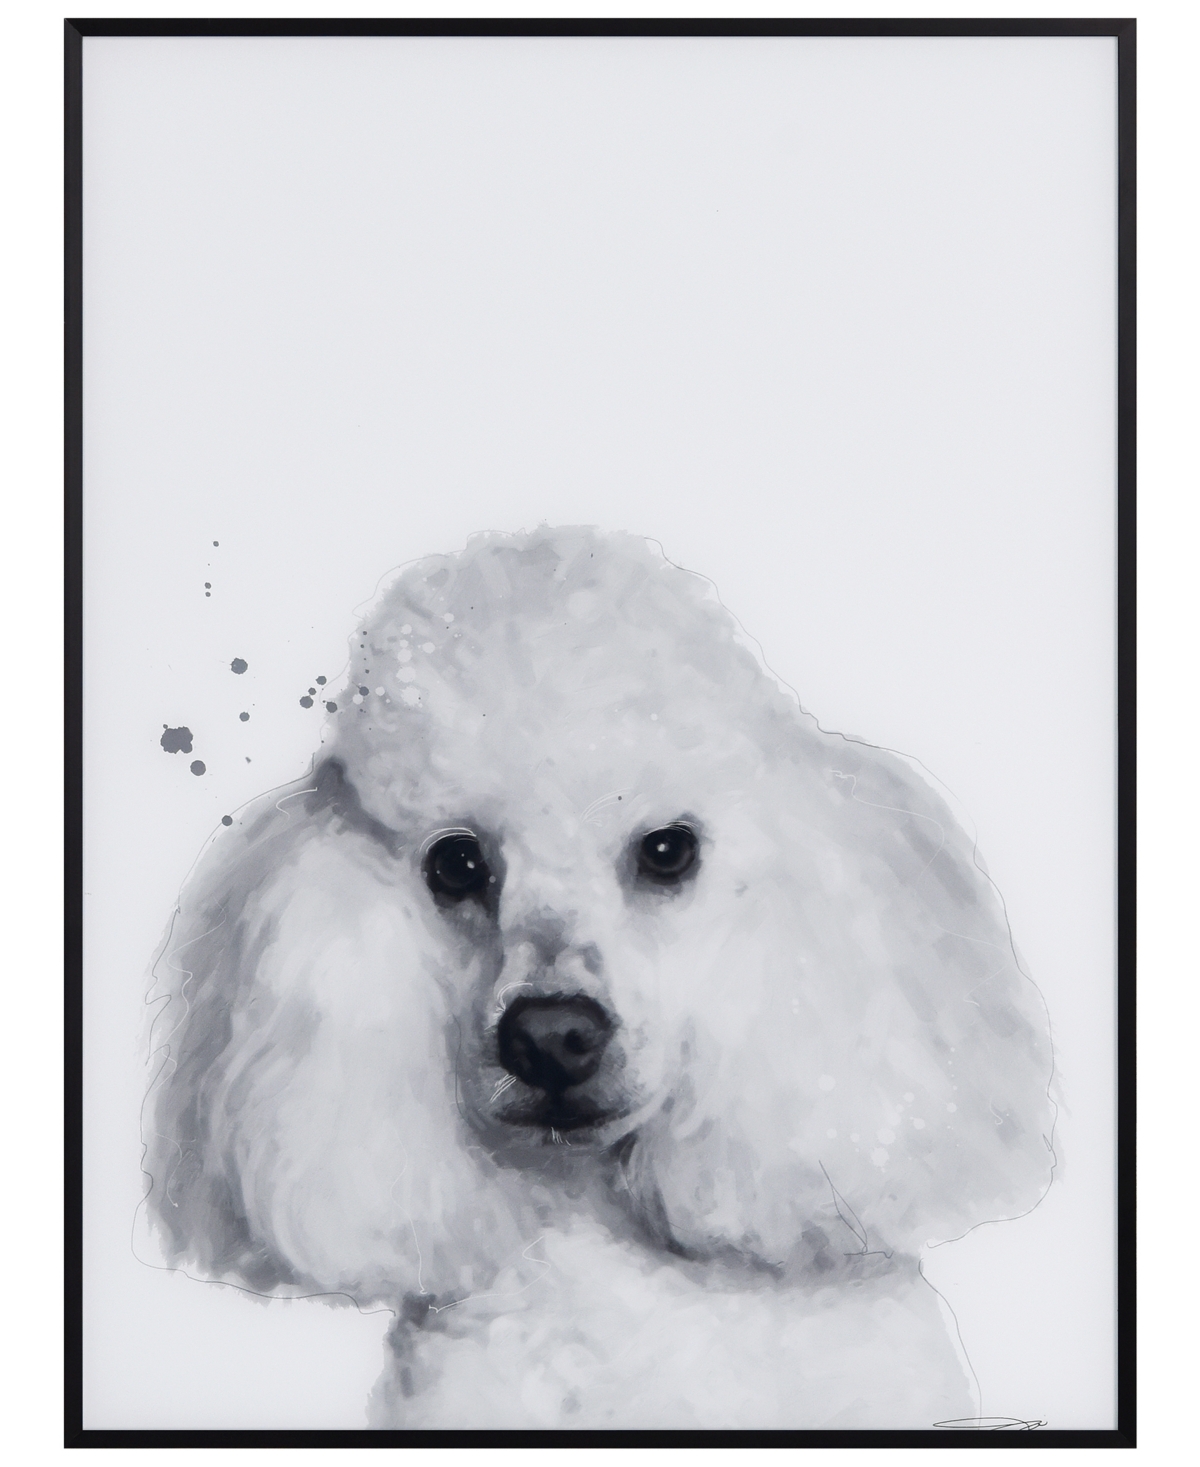 Empire Art Direct "poodle" Pet Paintings On Printed Glass Encased With A Black Anodized Frame, 24" X 18" X 1" In Black And White